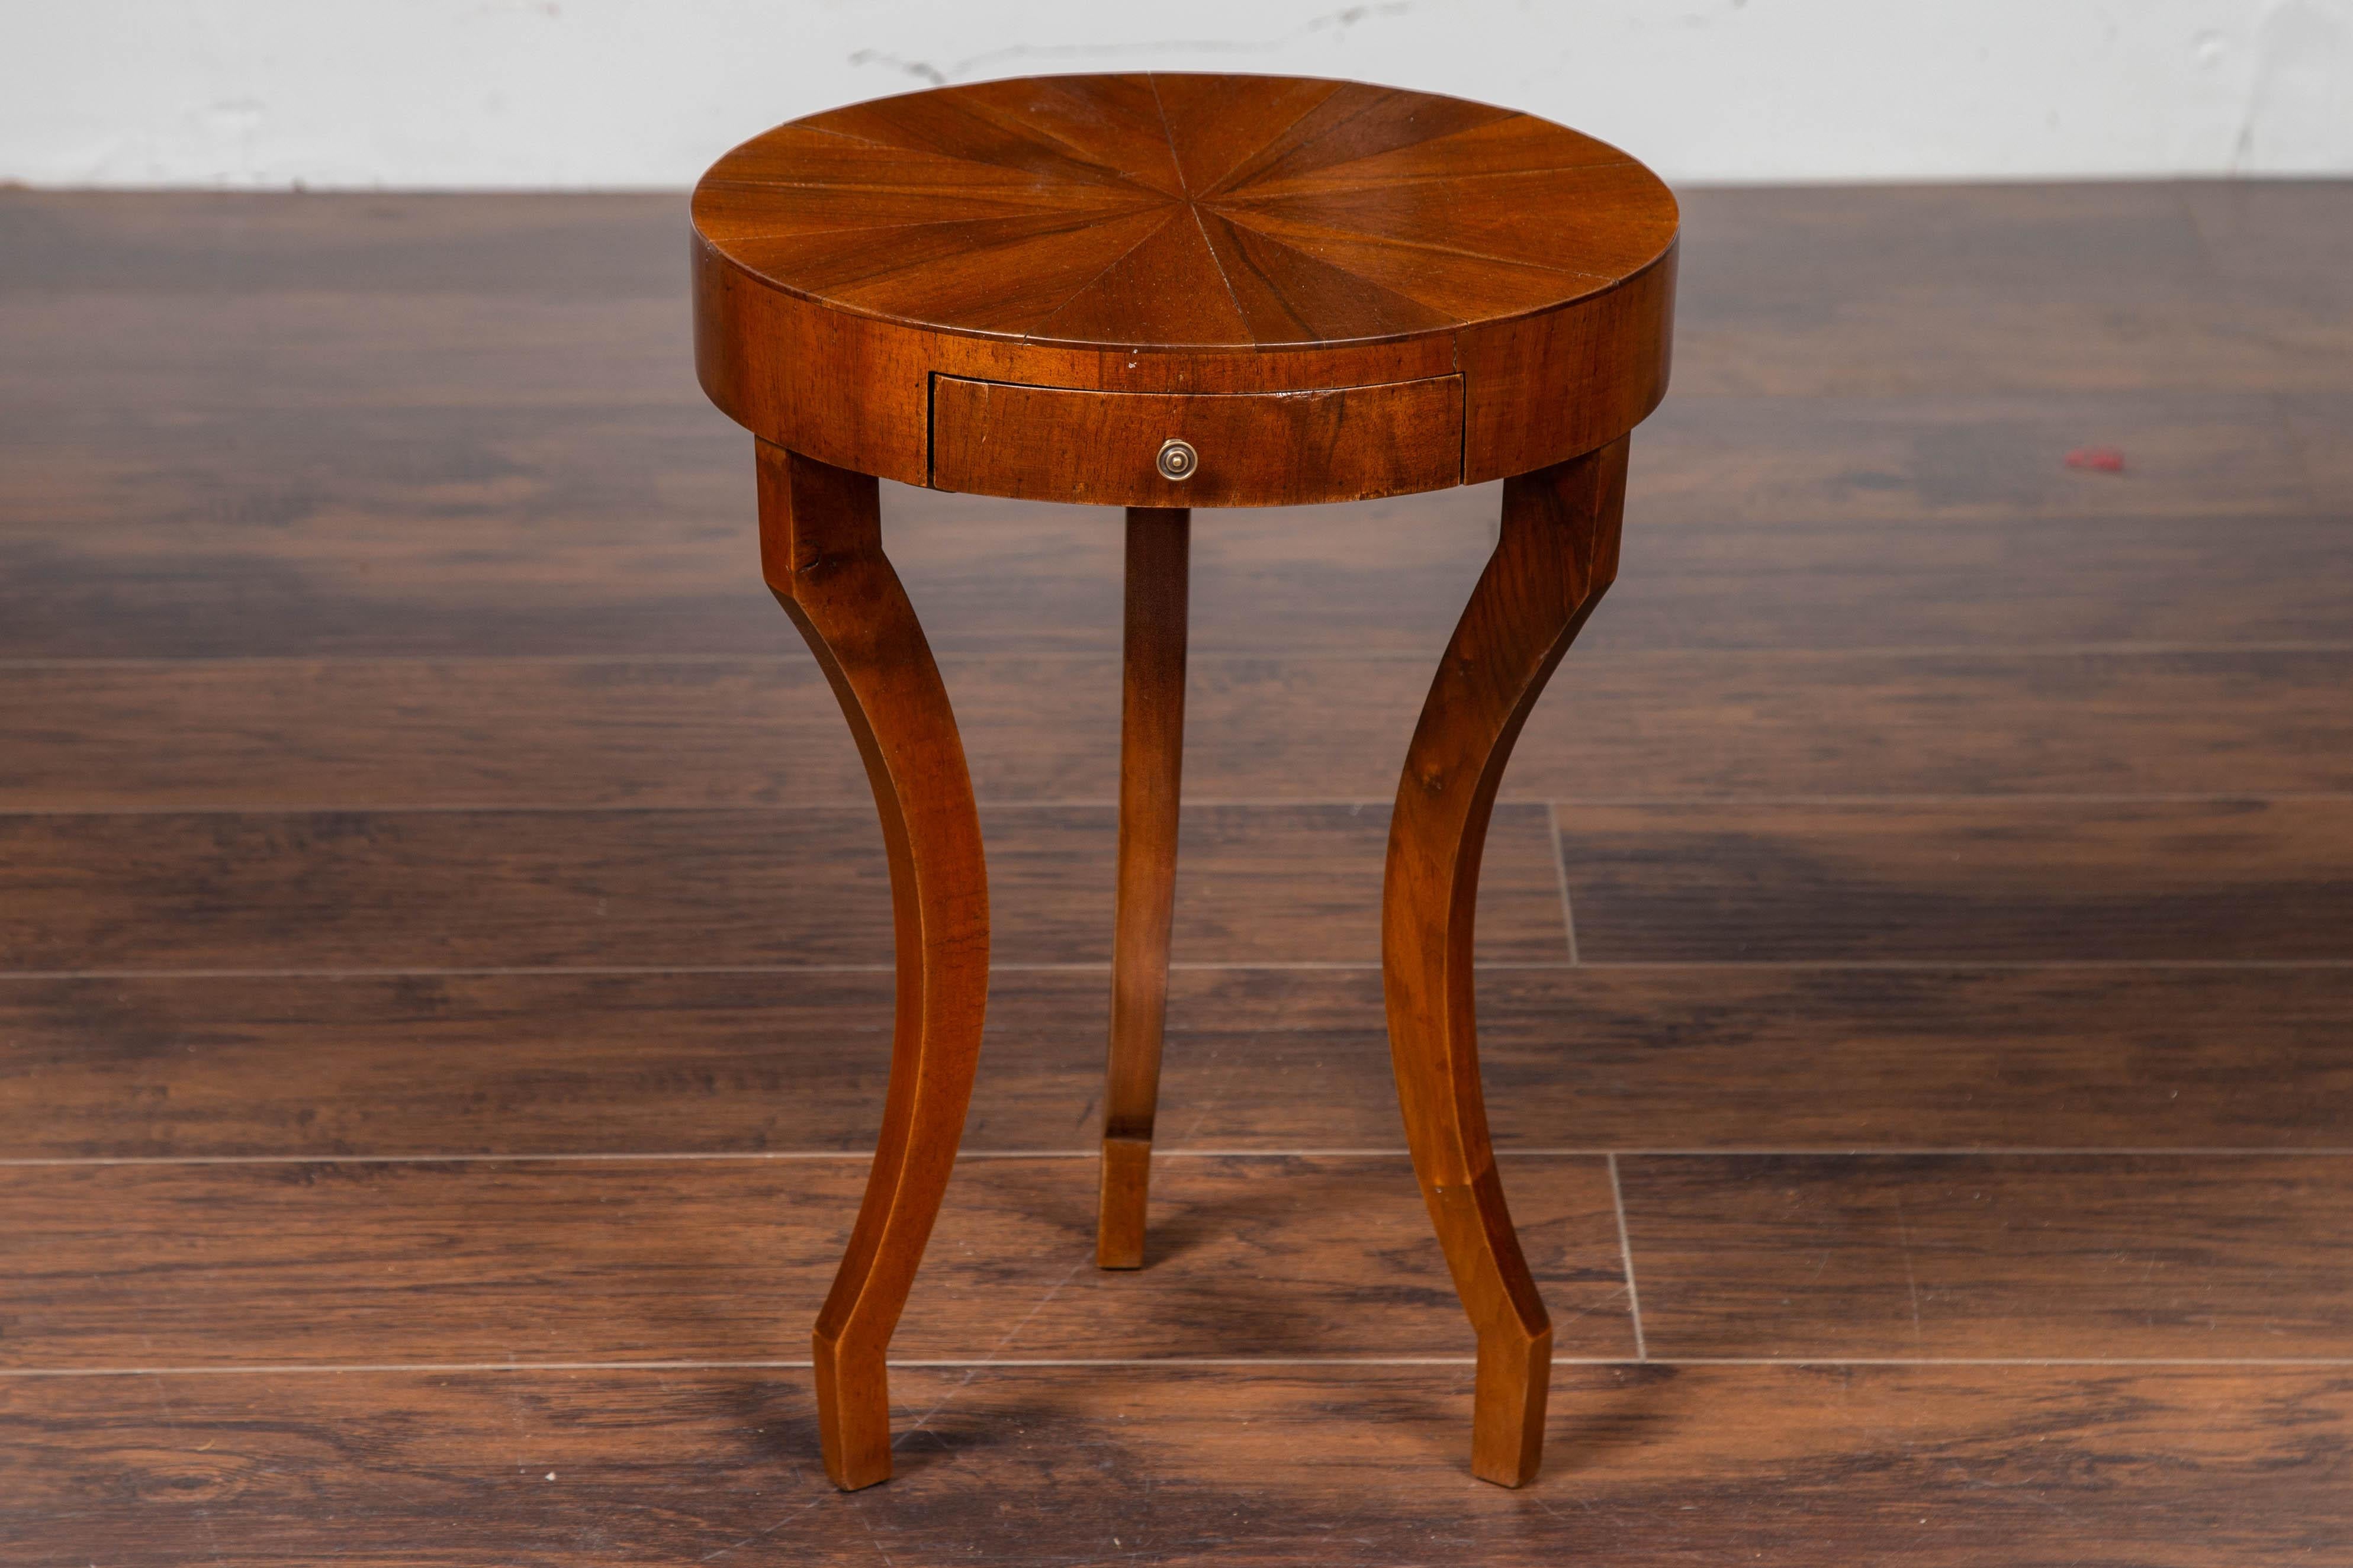 An Italian drink table from the mid-20th century, with radiating veneer and single drawer. Born in Italy during the midcentury period, this side table features a circular top adorned with radiating veneer, sitting above a single drawer fitted with